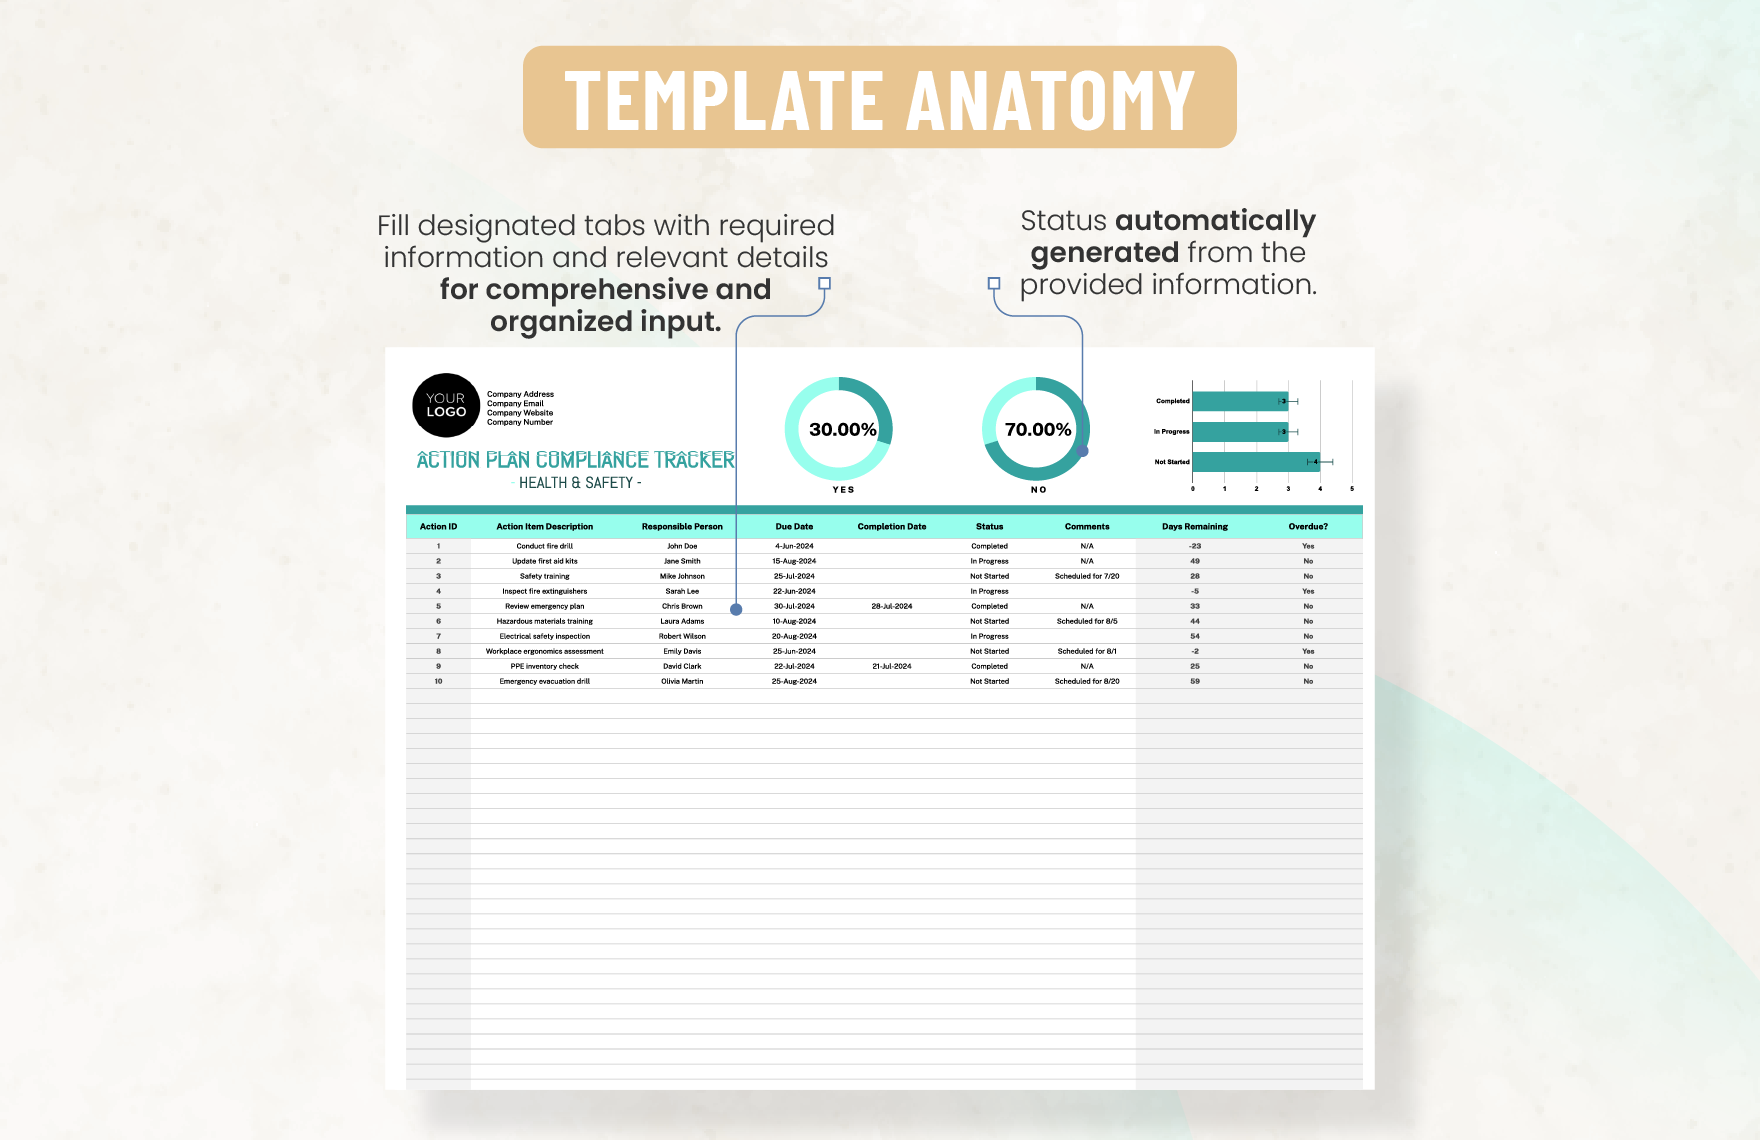 Health & Safety Action Plan Compliance Tracker Template